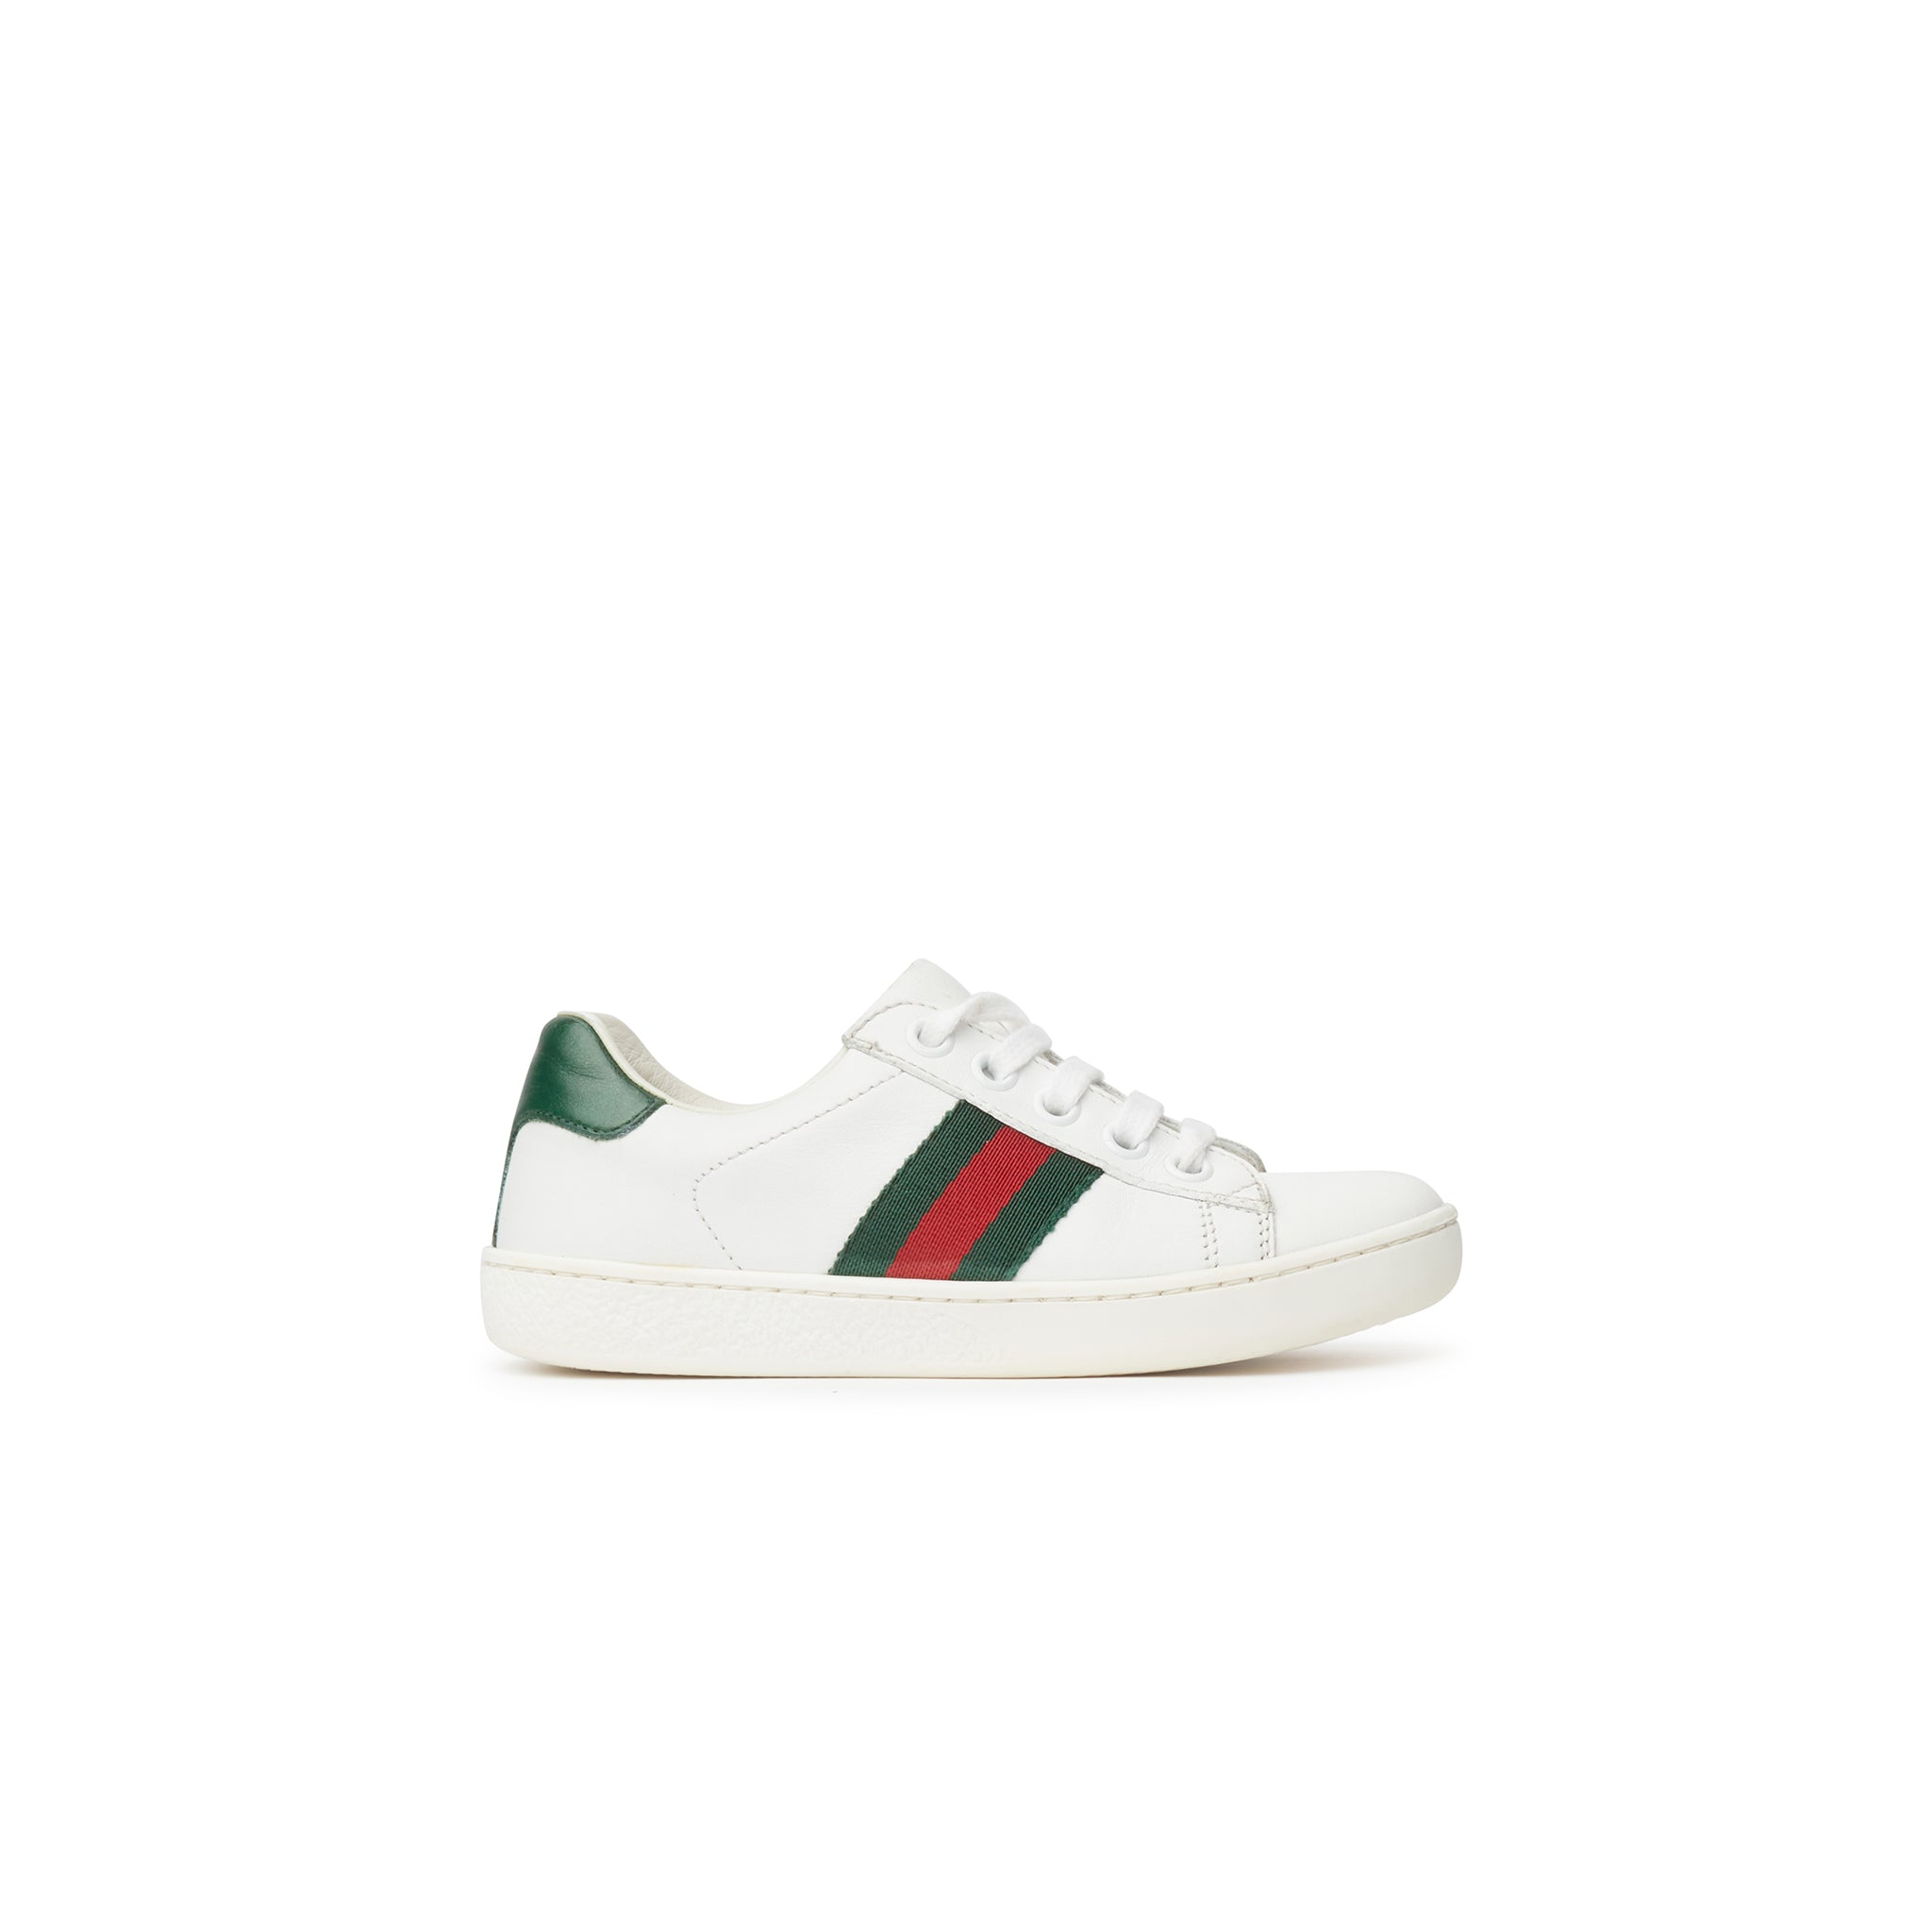 Preloved - Gucci Ace Leather Lace Up White Kids Sneaker